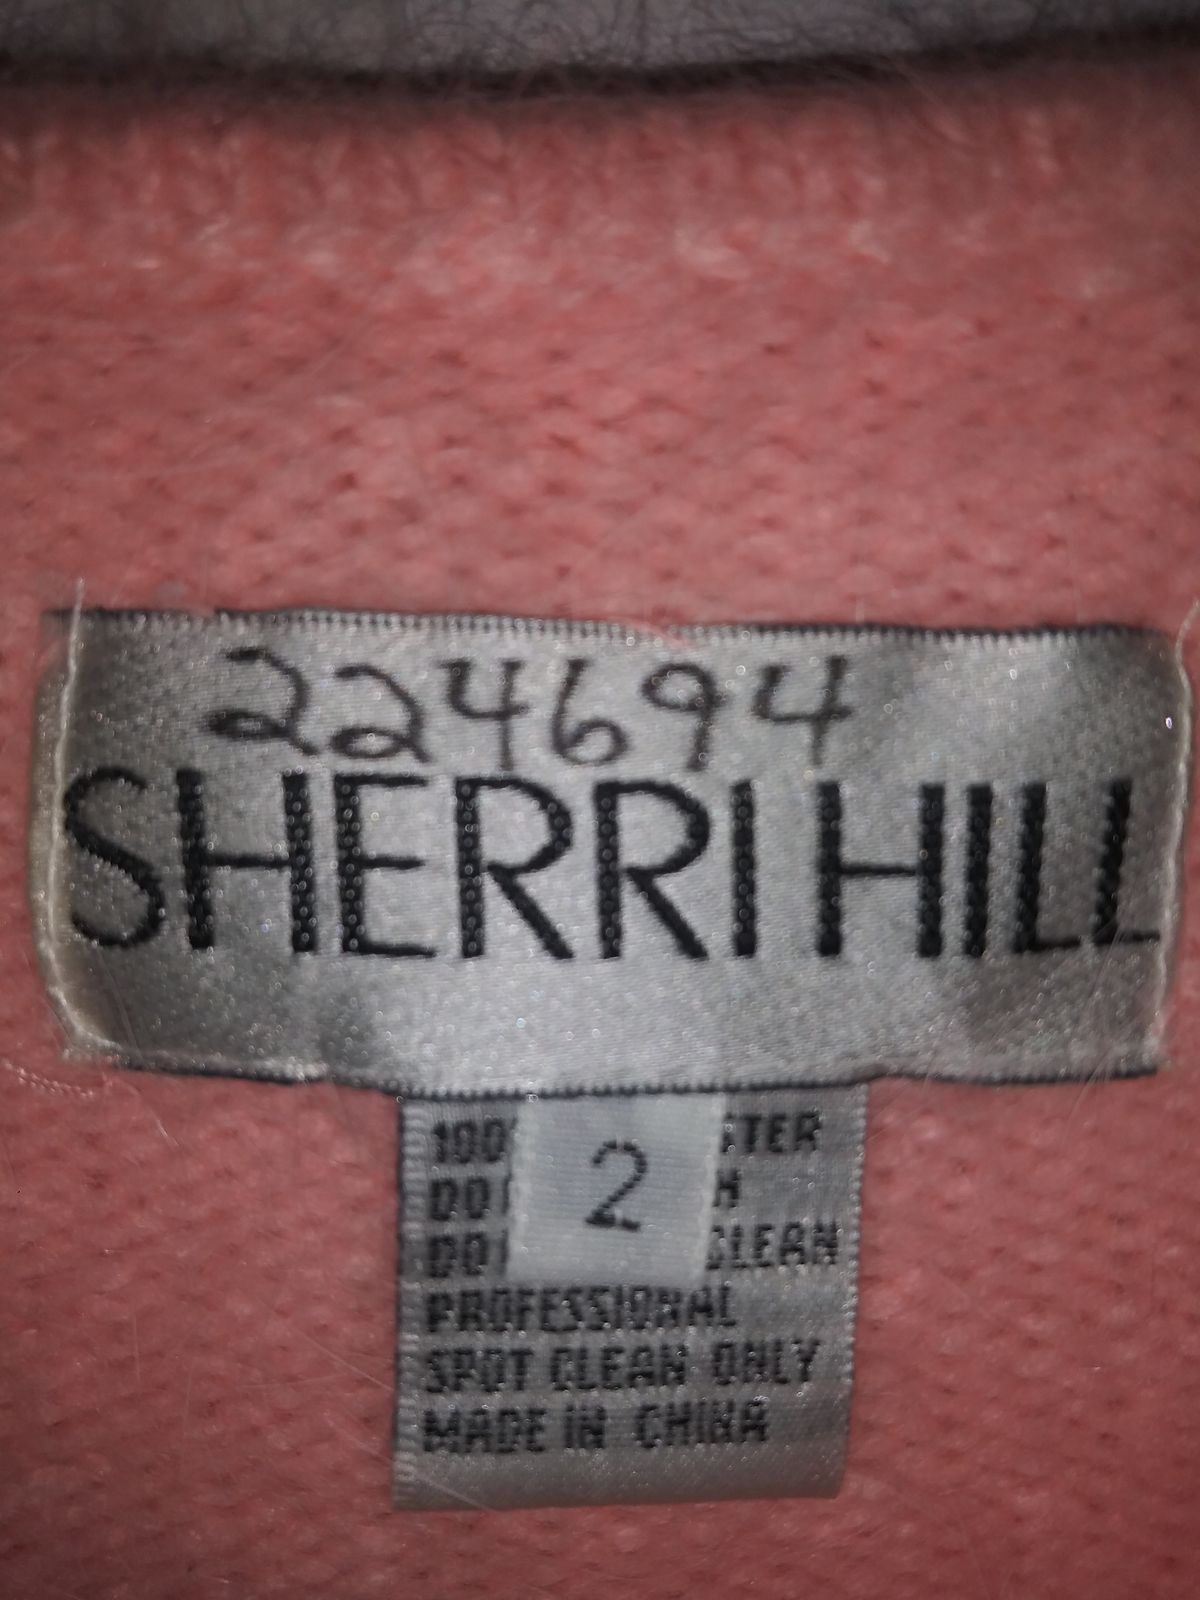 Sherri Hill Size 2 Homecoming Long Sleeve Lace Light Pink Cocktail Dress on Queenly